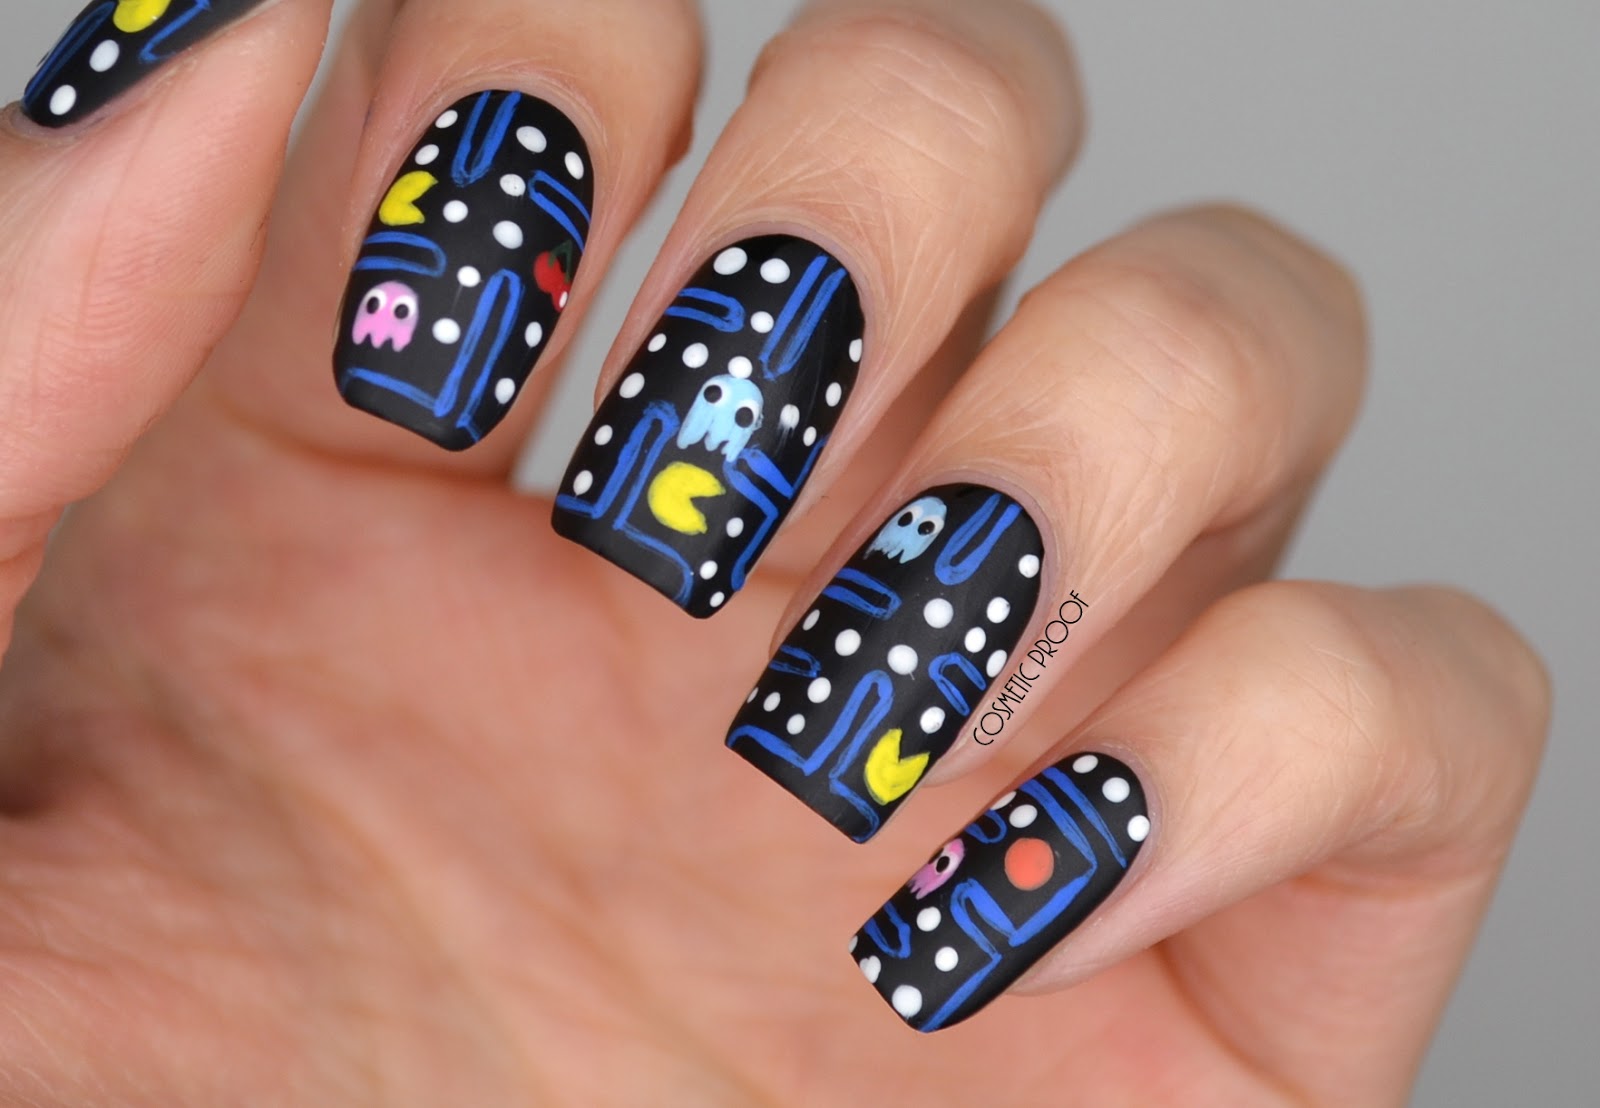 1. Pacman Ghost Nail Art Design - wide 5